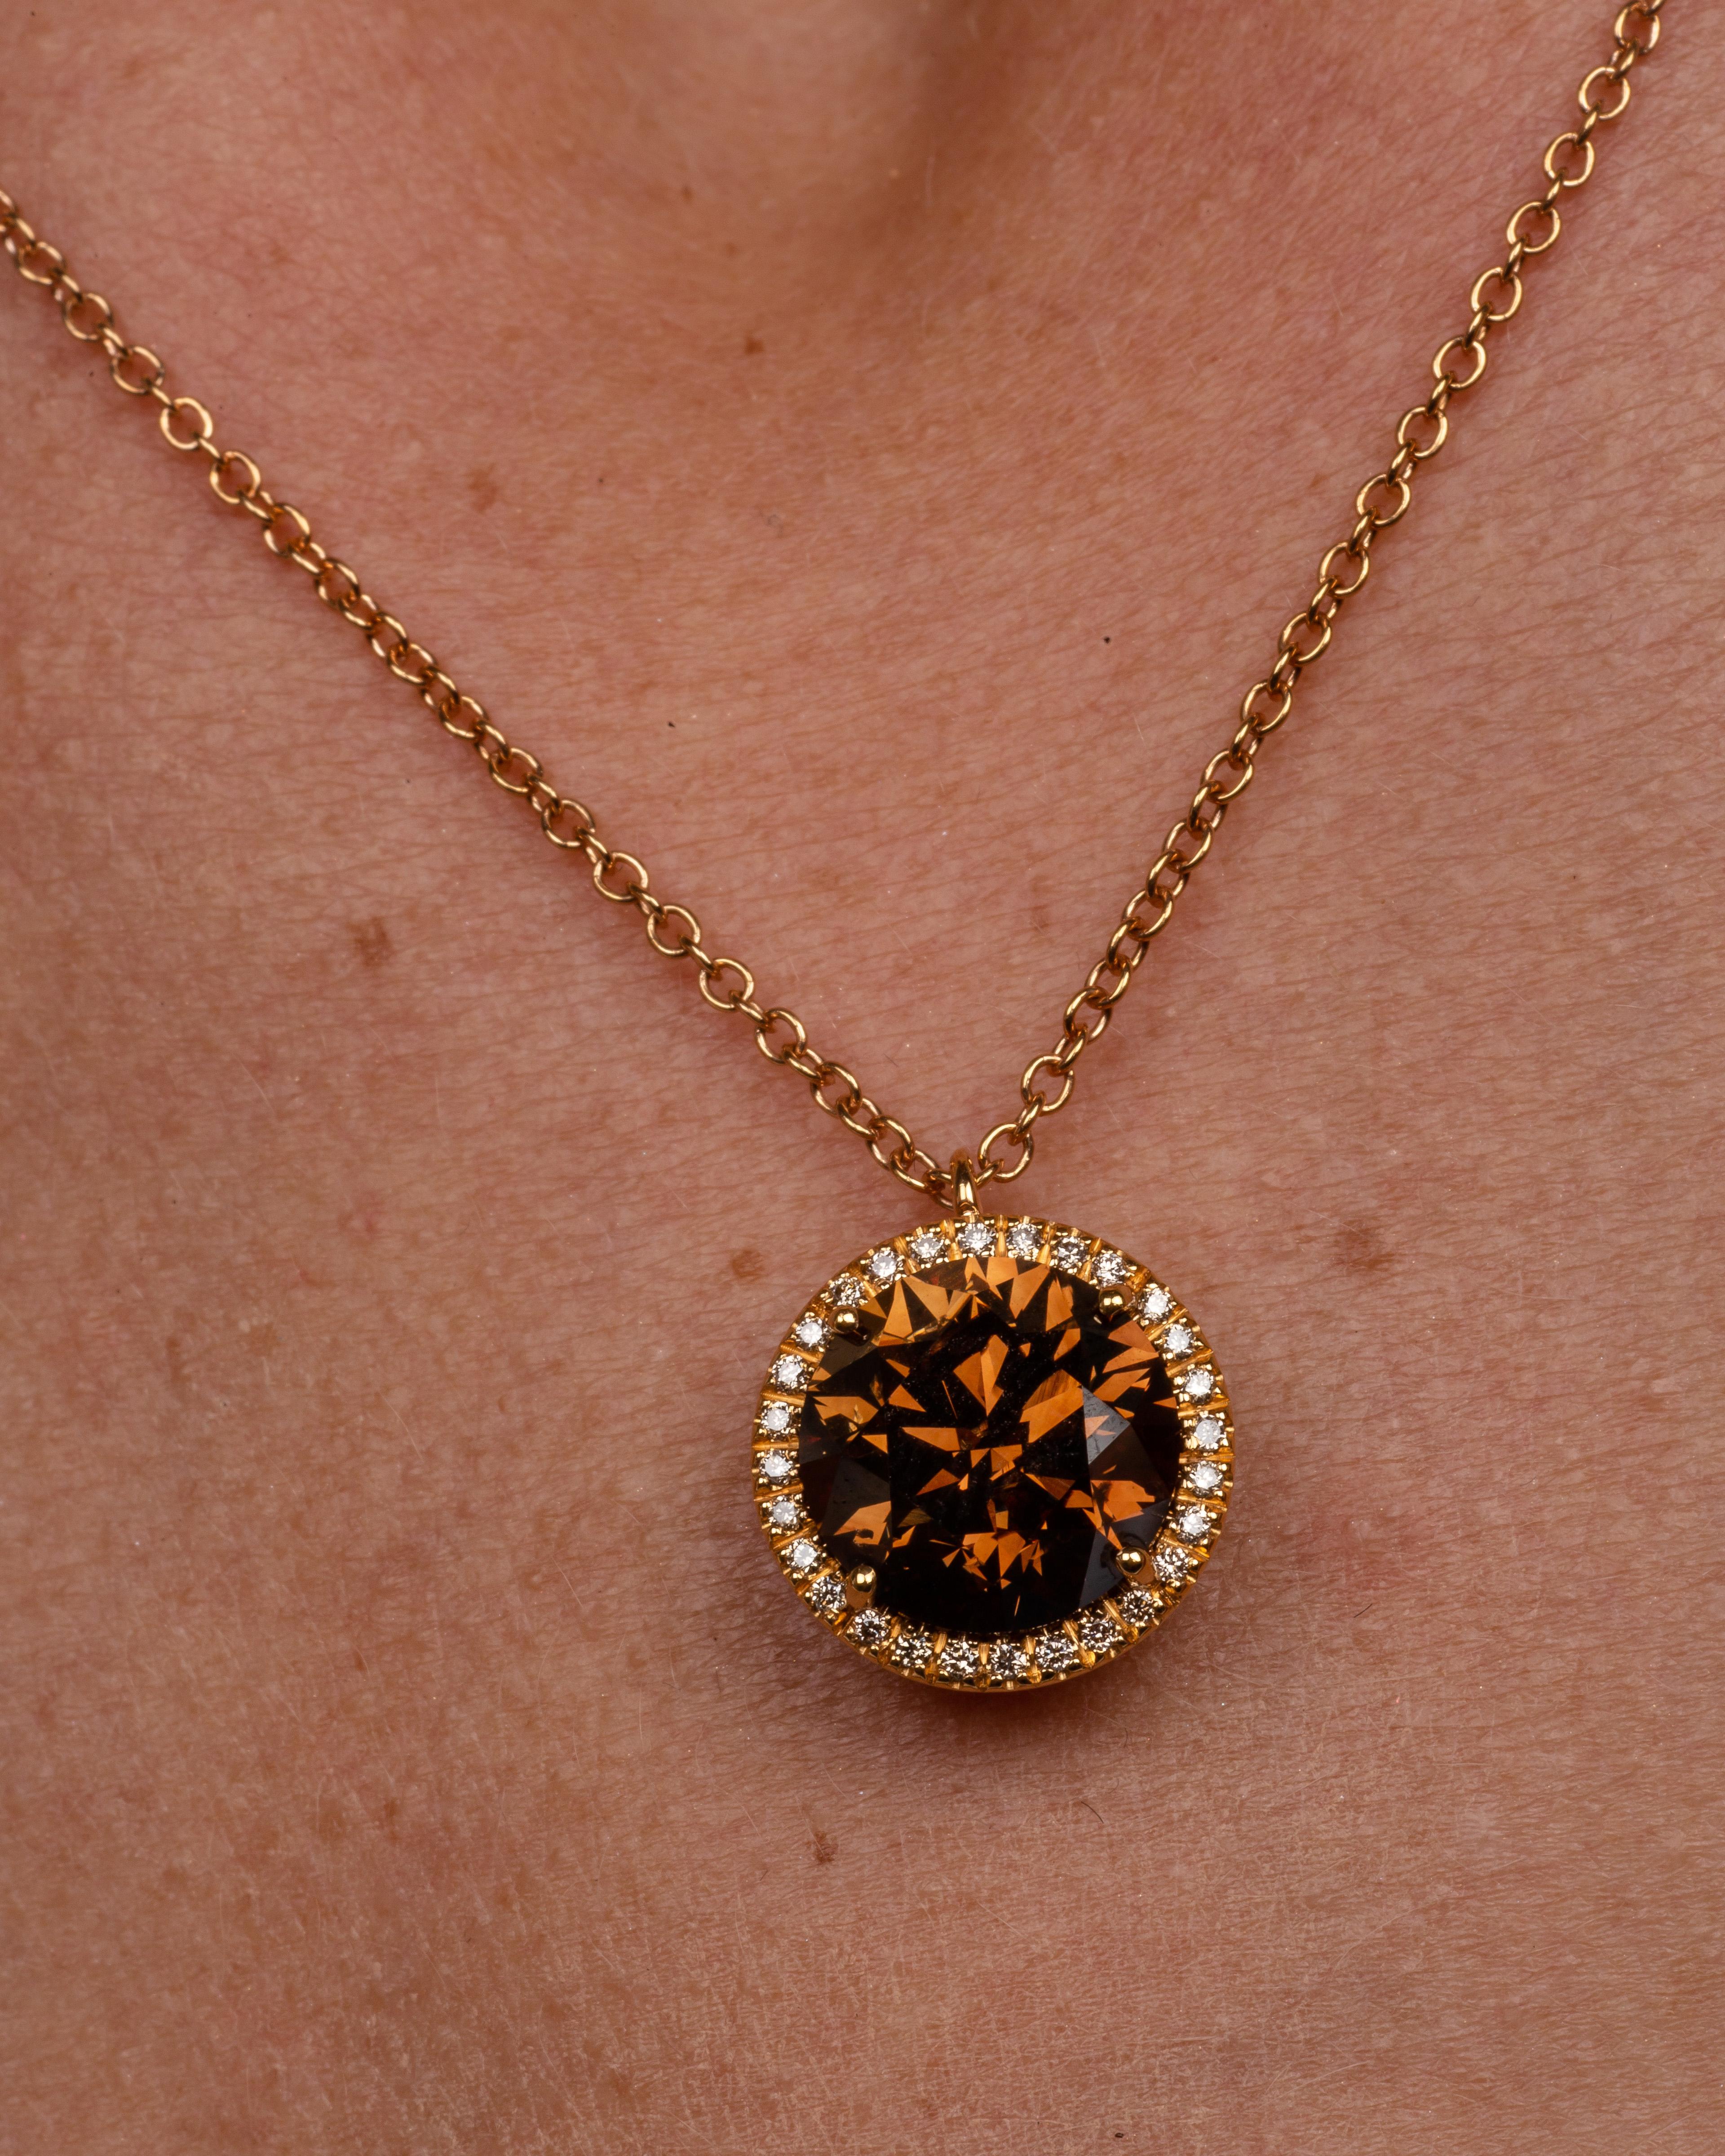 This 18K rose gold elegant pendant is from our Divine Collection. It is made of a round brown diamond in total of 5.01 Carat which is decorated by round brown diamonds in total of 0.14 Carat and round colorless diamonds in total of 0.12 Carat. Total